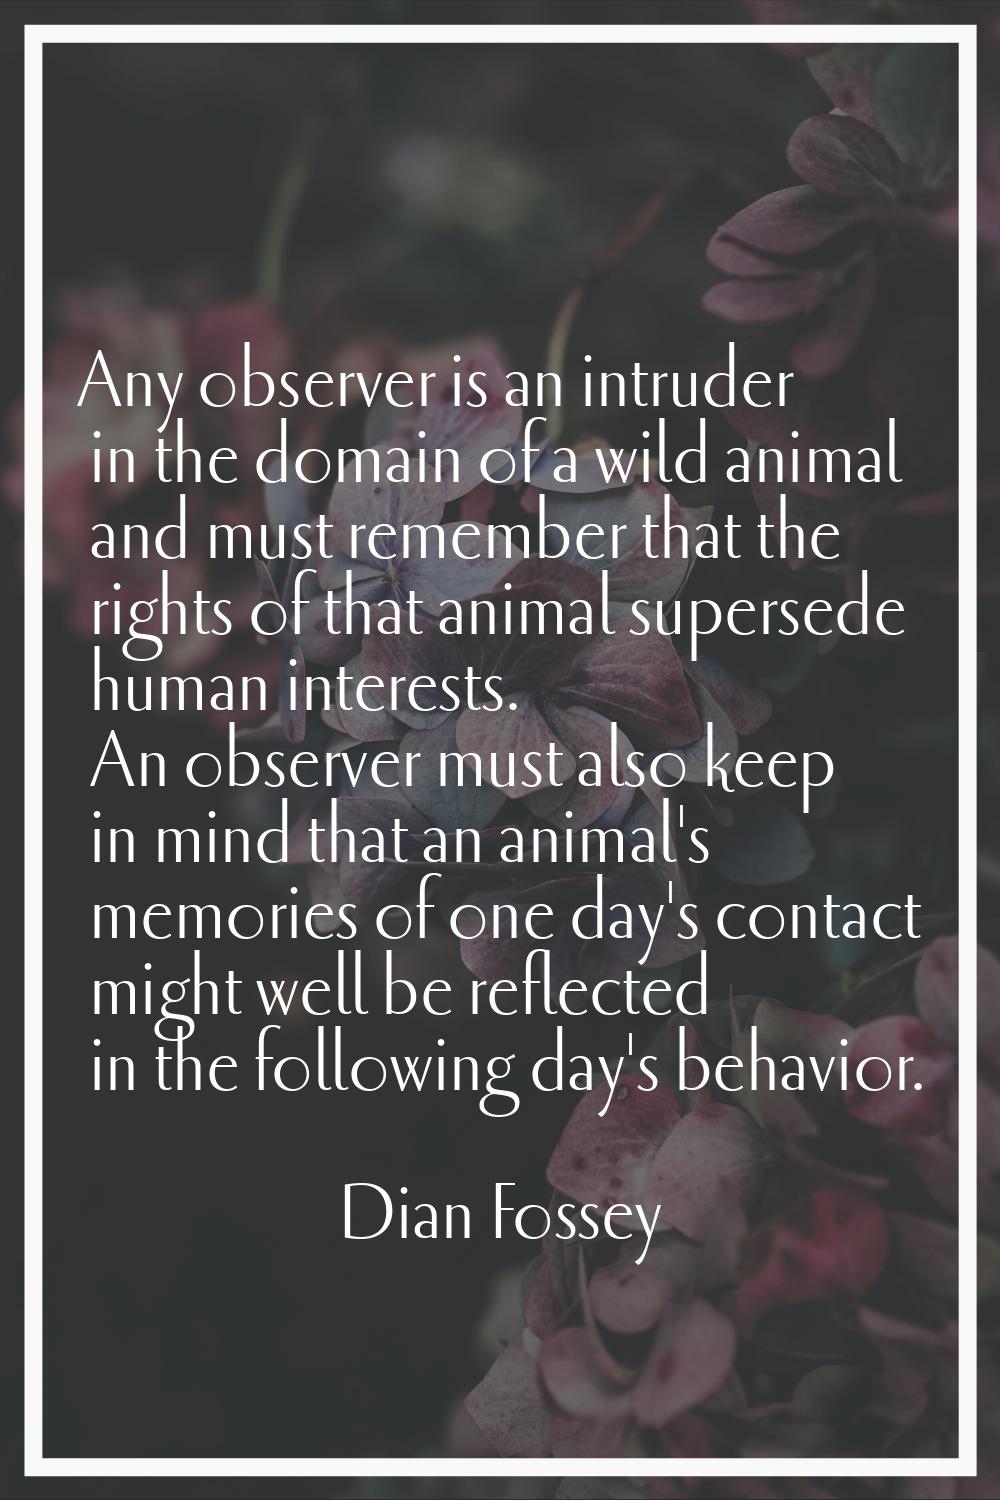 Any observer is an intruder in the domain of a wild animal and must remember that the rights of tha